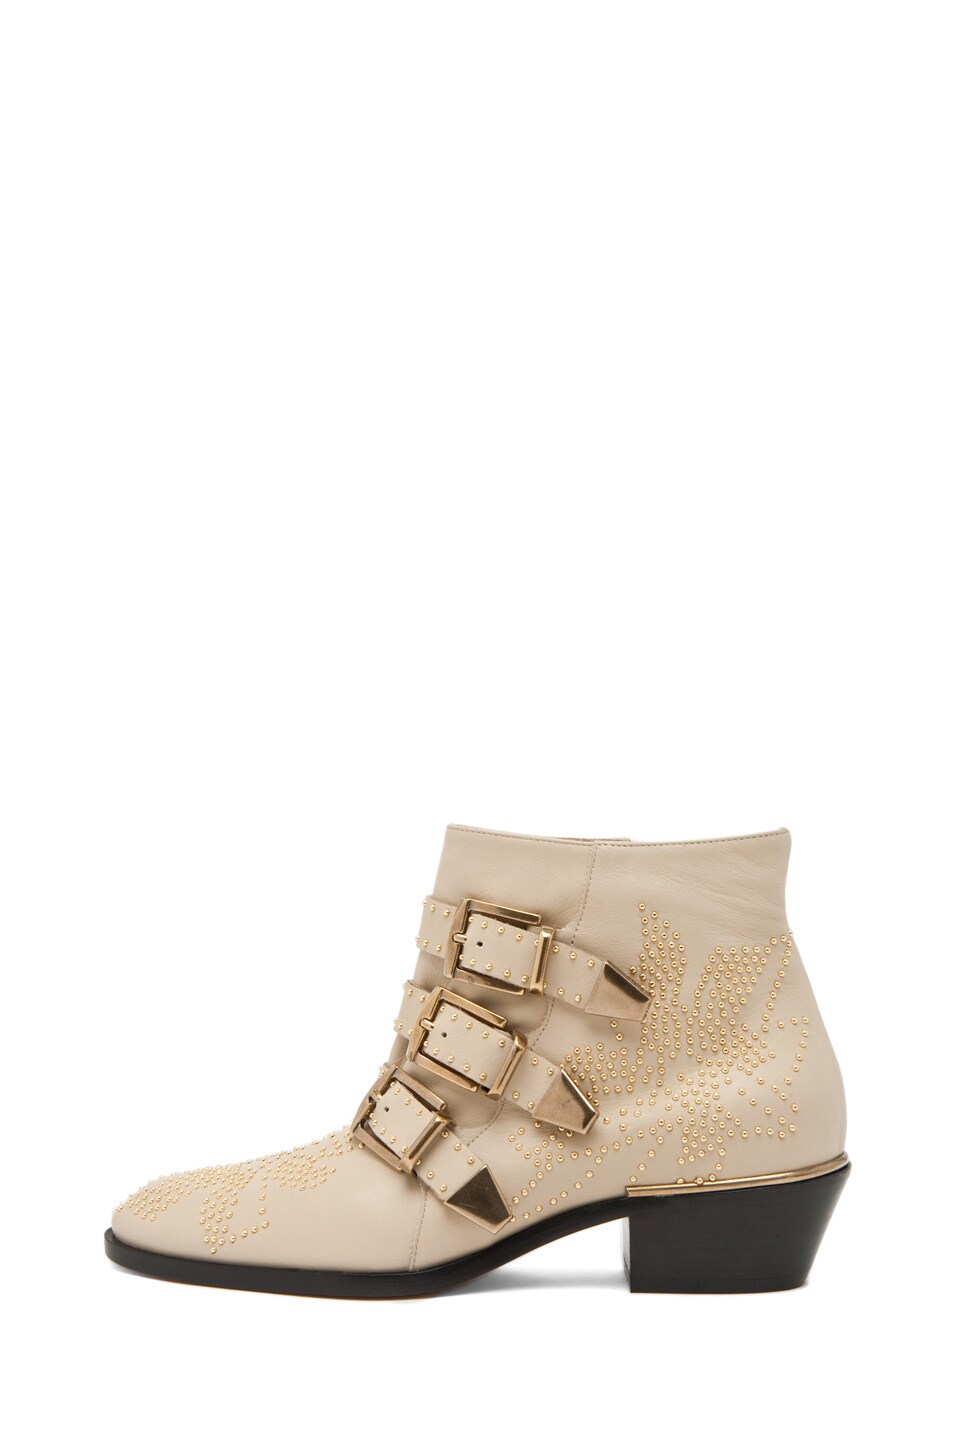 Image 1 of Chloe Susanna Leather Studded Bootie in Cream